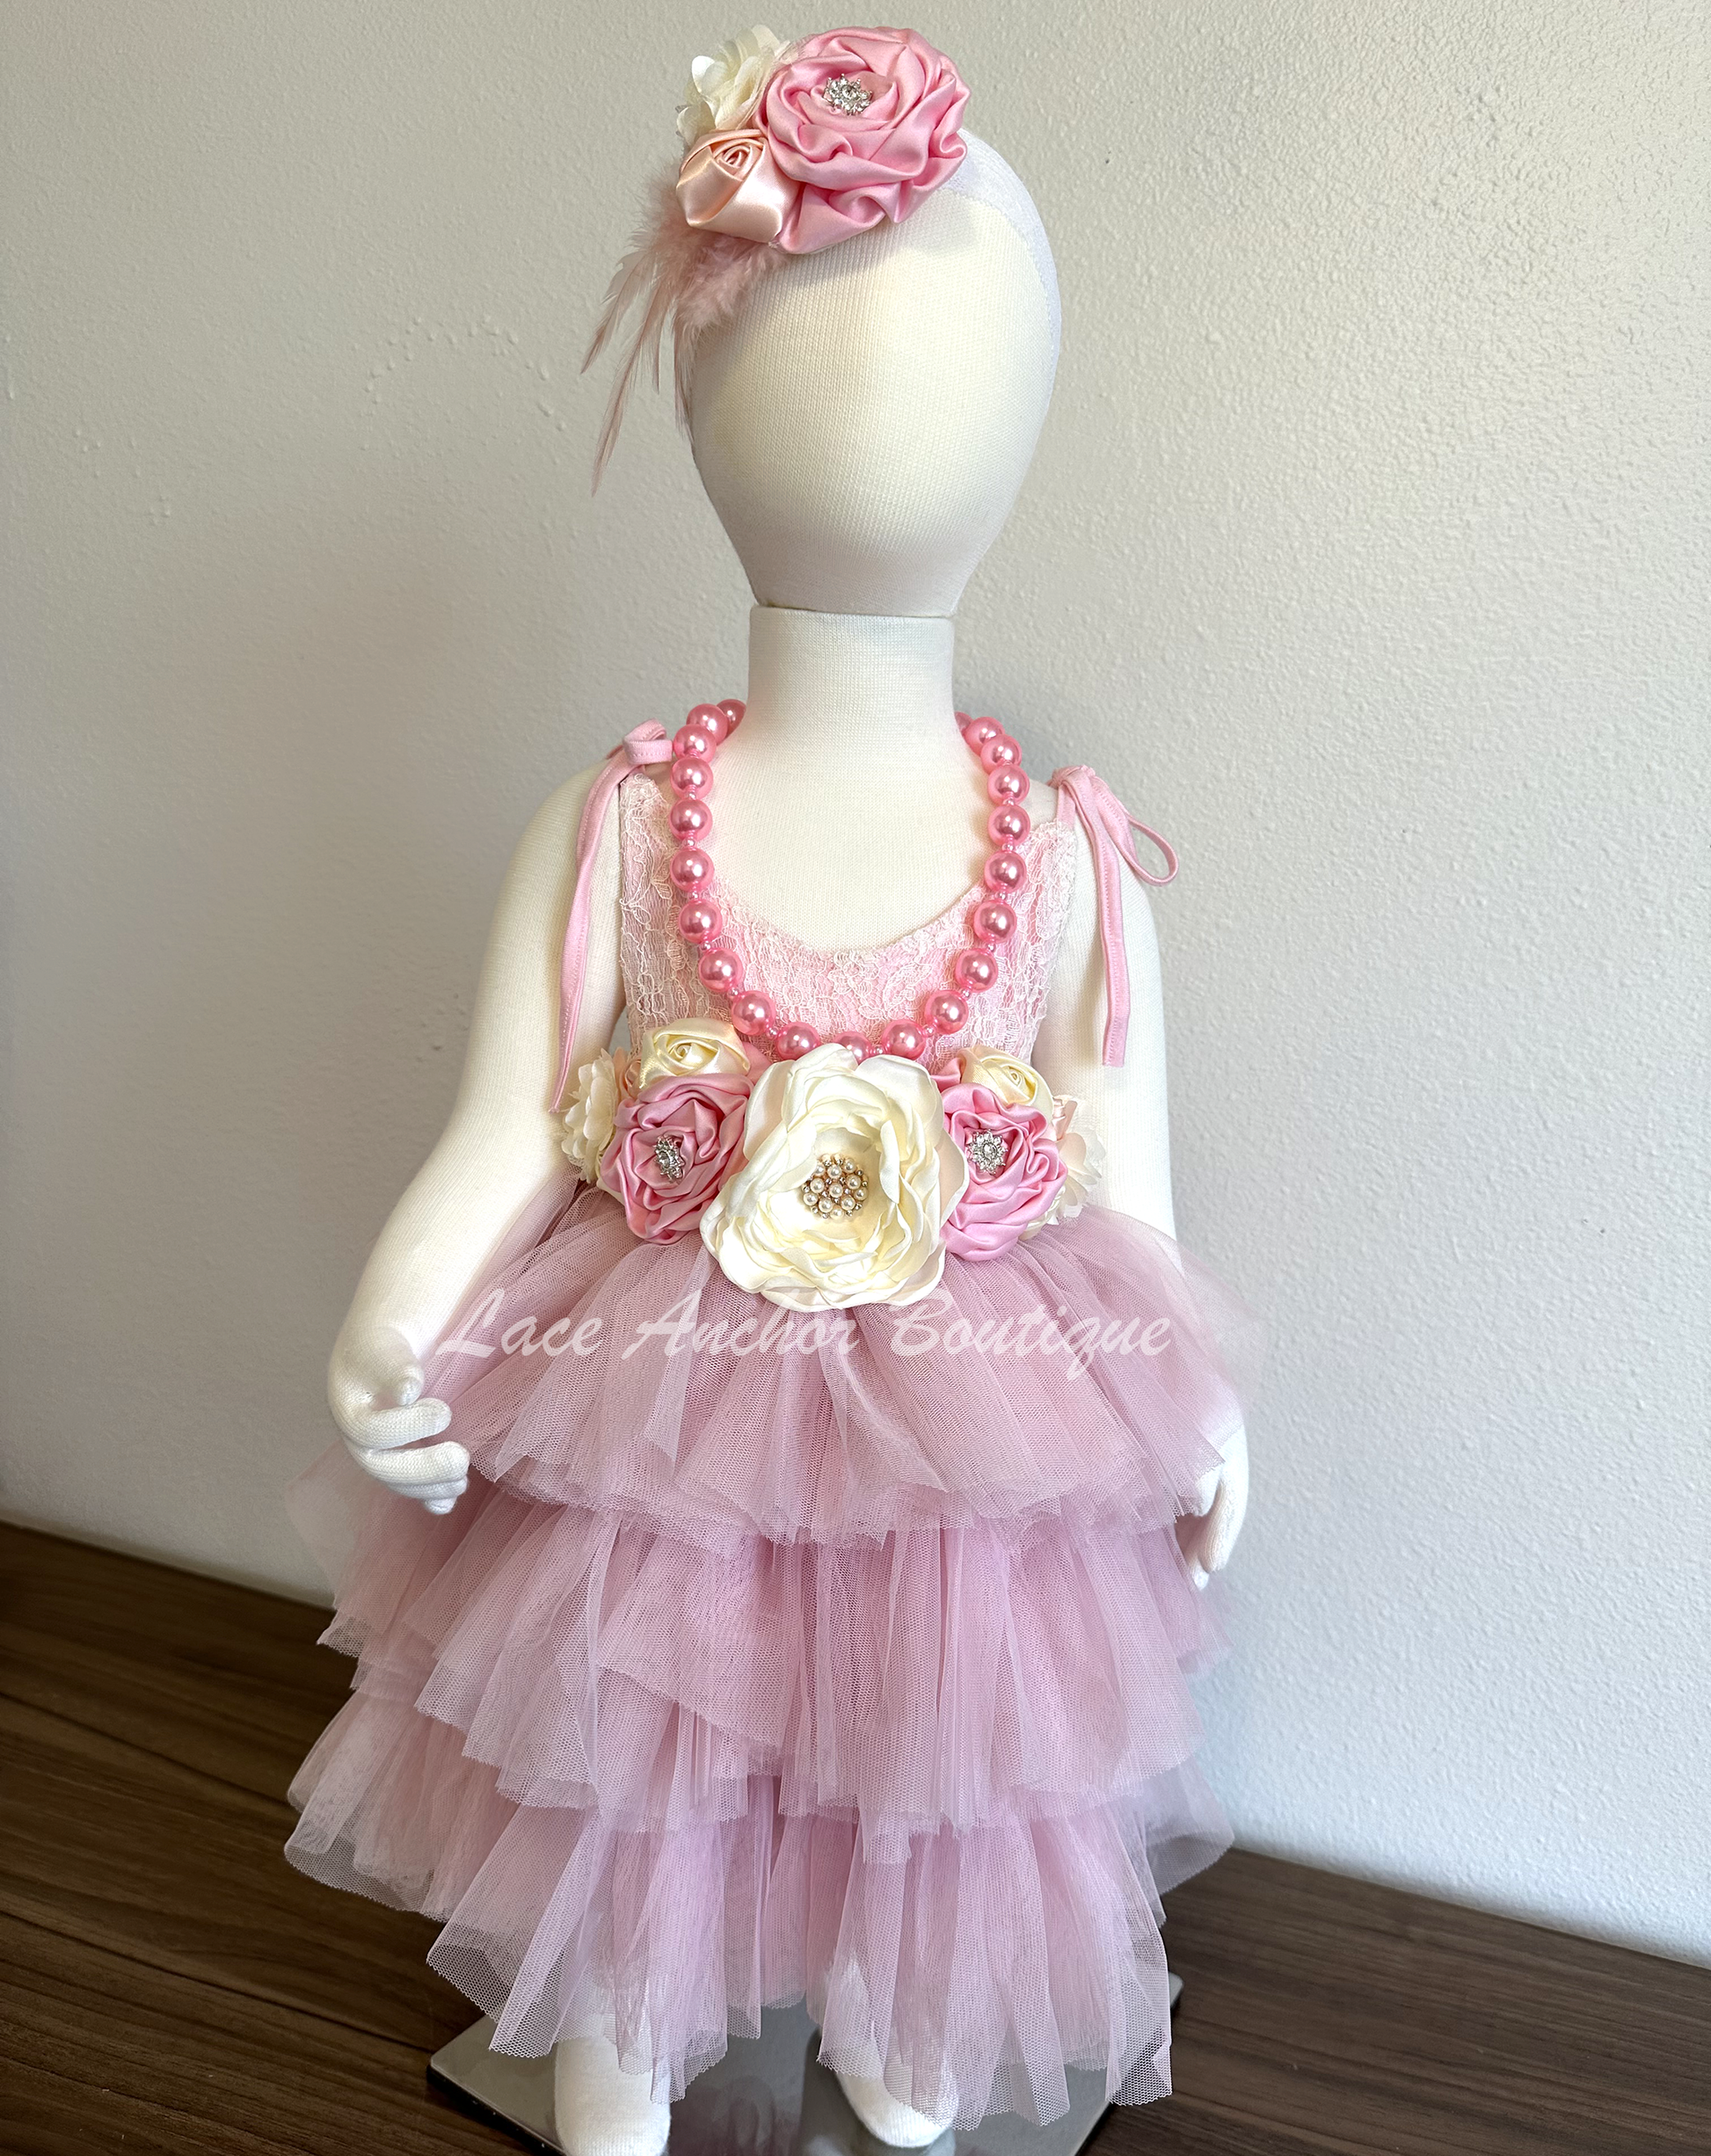 Light pink toddler girls dress with lace top, tied straps, layered ruffled tulle skirt, and silky floral tied  sash. Girls flower girl dress.